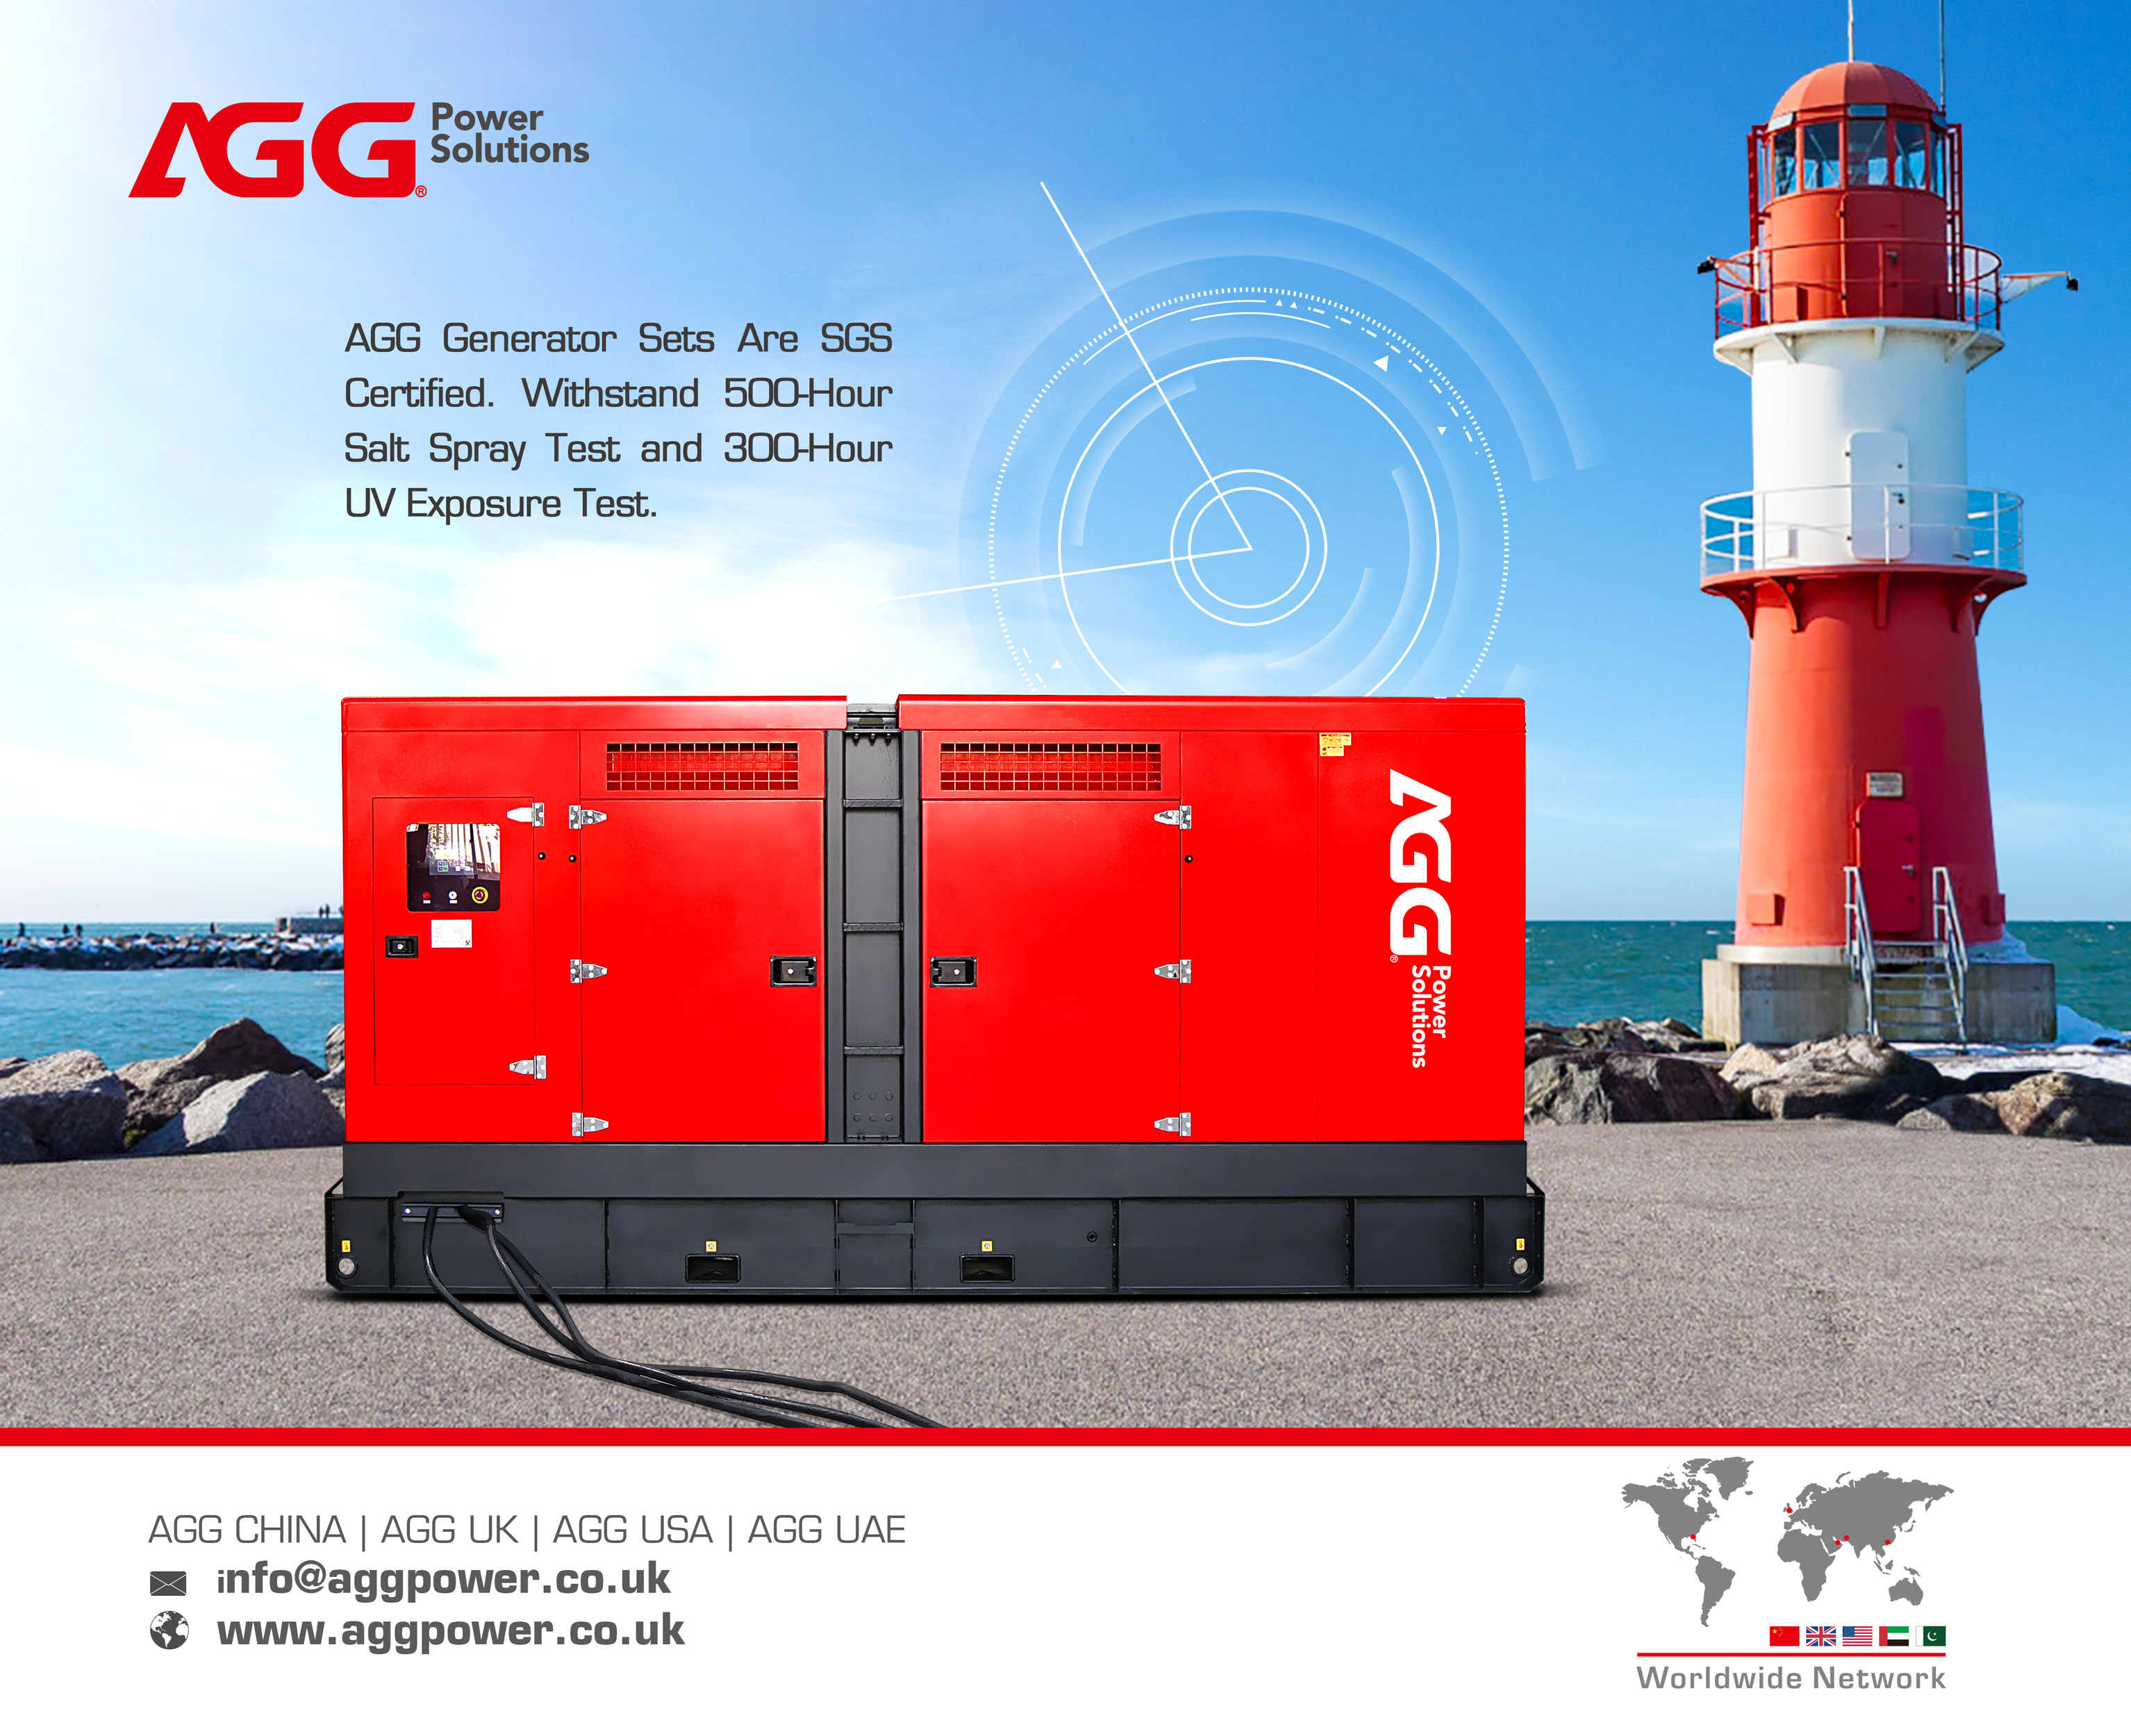 Withstand 500-Hour Salt Spray Test and 300-Hour UV Exposure Test — AGG Generator Sets Are SGS Certified